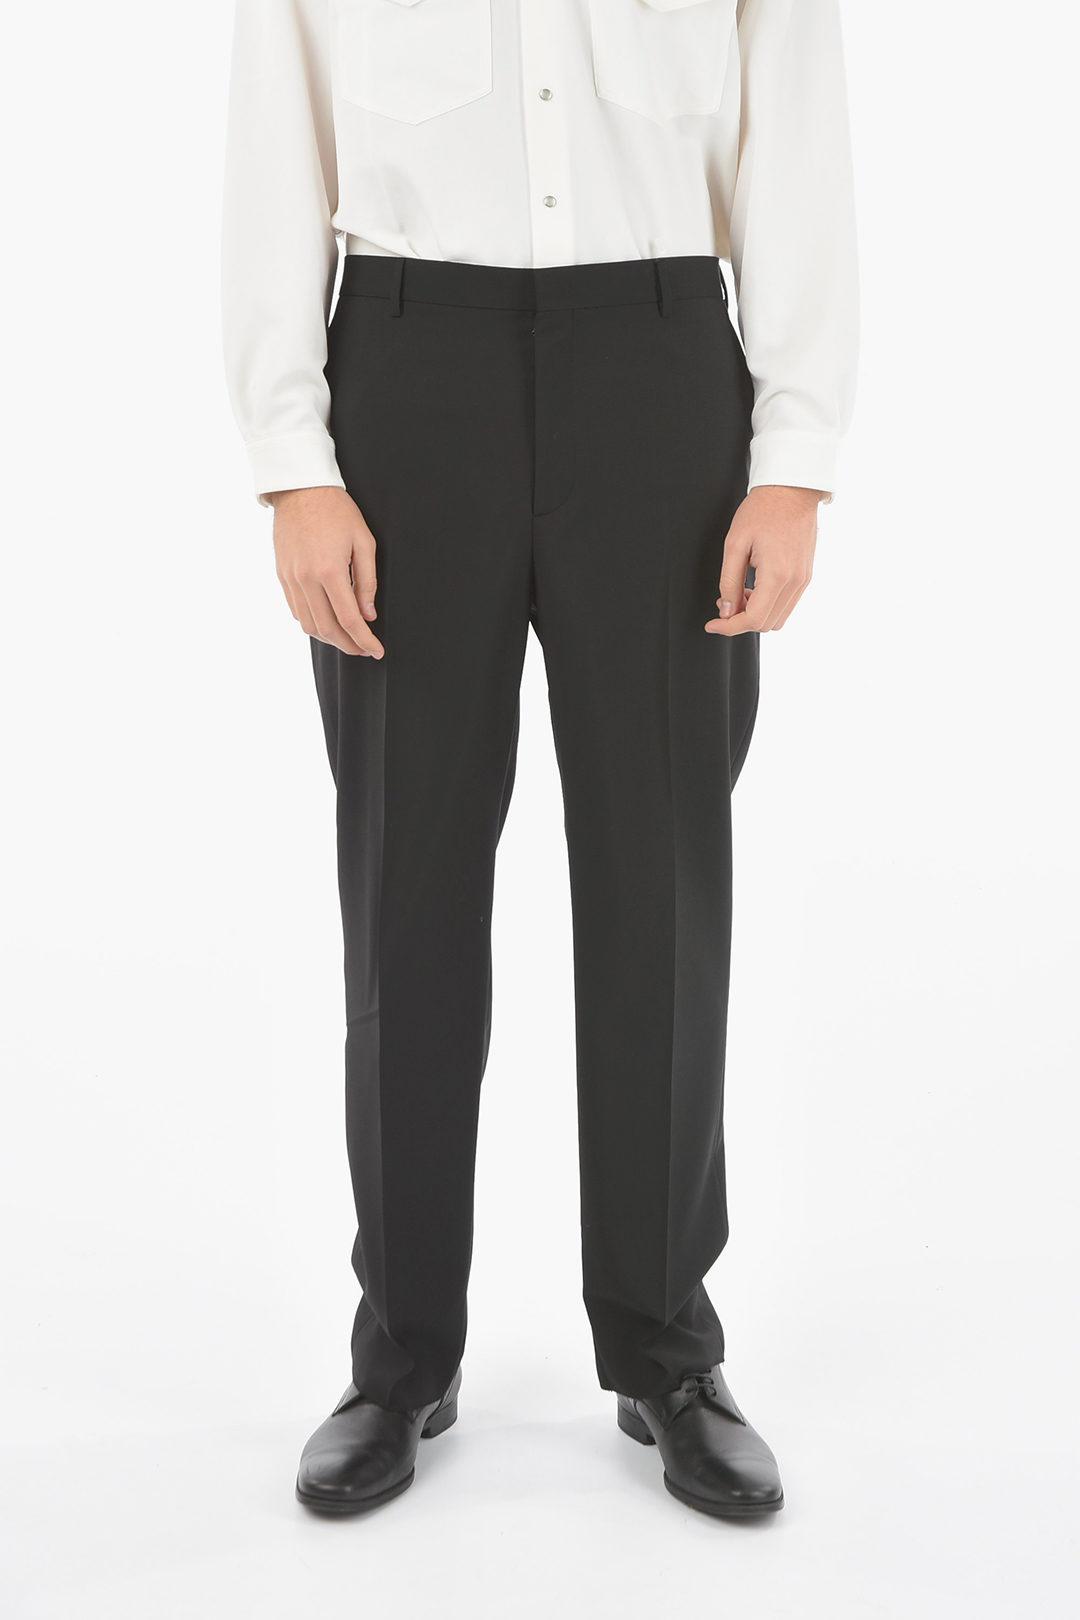 VALENTINO Mohair and Wool Dress Pants